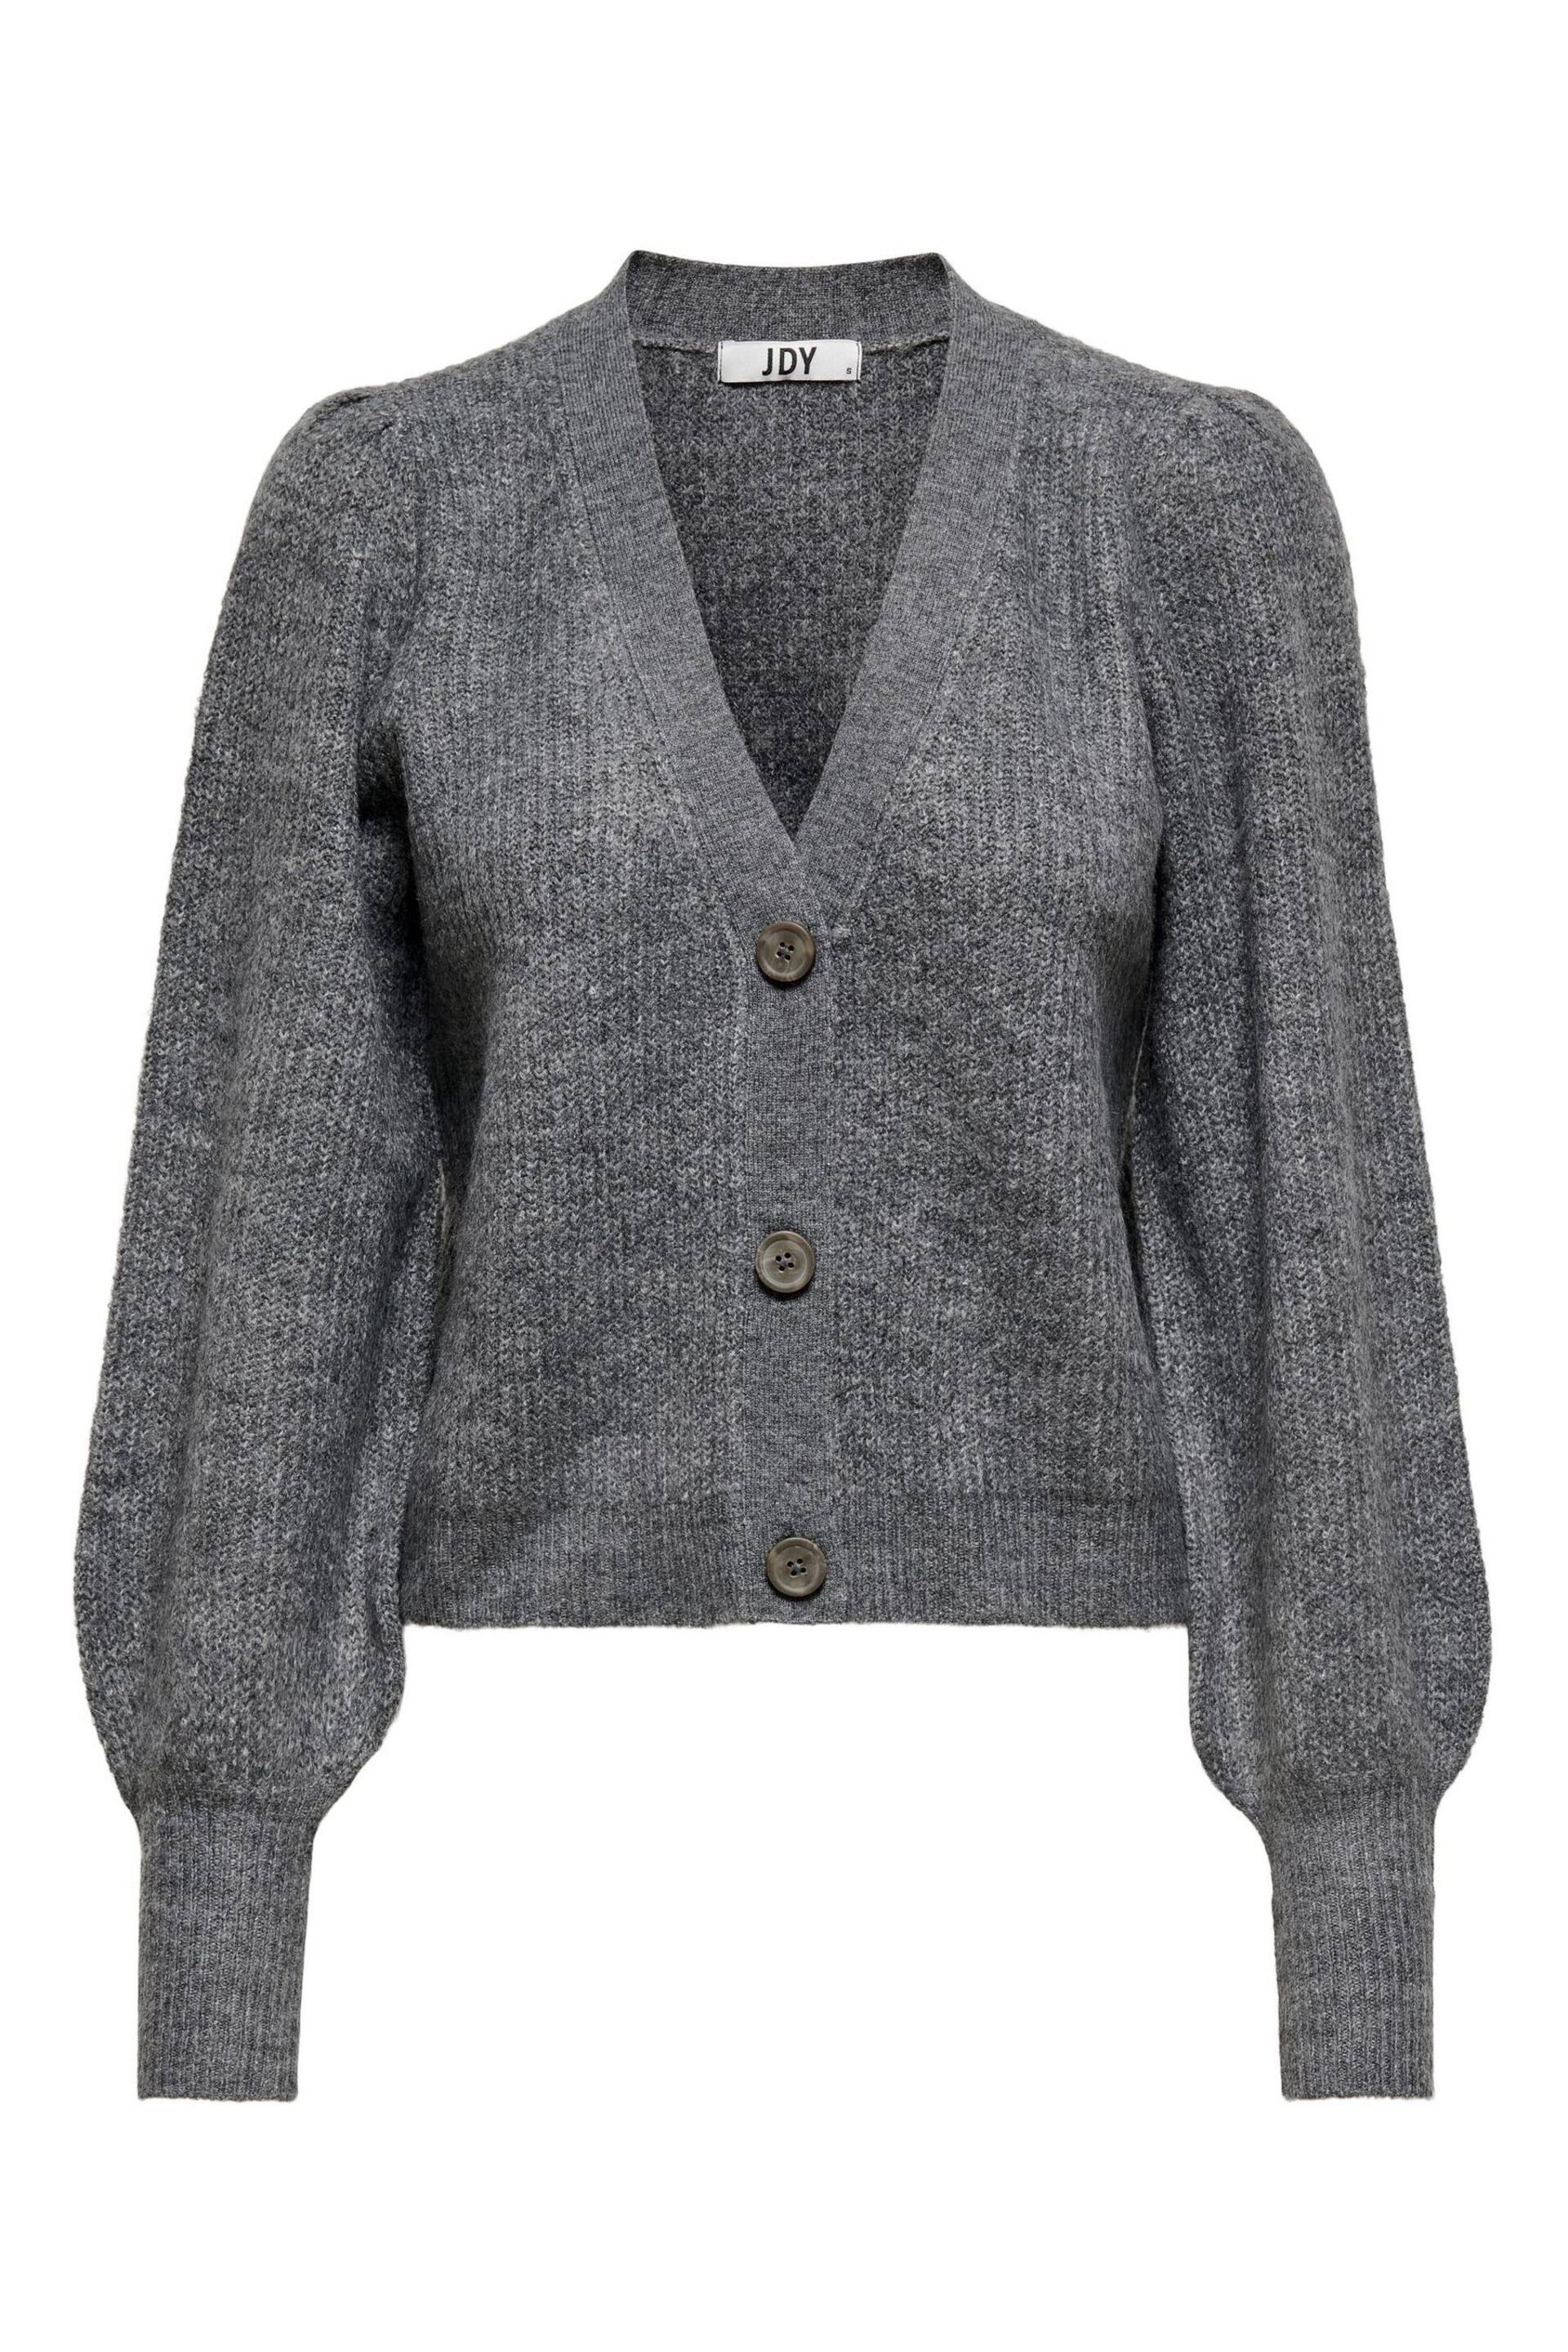 JDY Grey Soft Touch Puff Sleeve Cardigan Jumper - Image 5 of 5